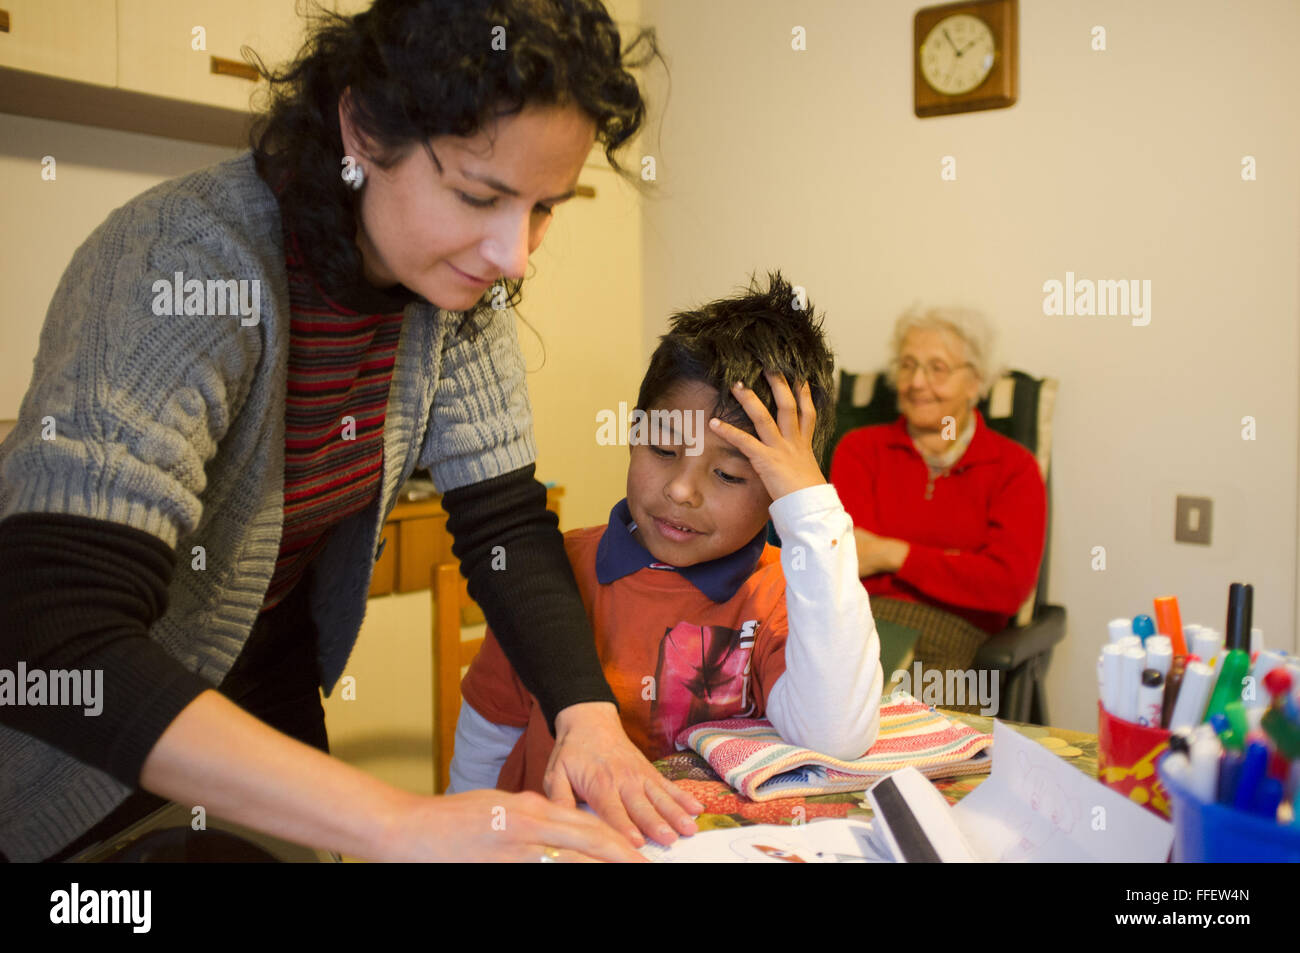 Mature caucasian woman helps her adopted latin boy with his homework while great grandmother watches smiling on a close chair Stock Photo